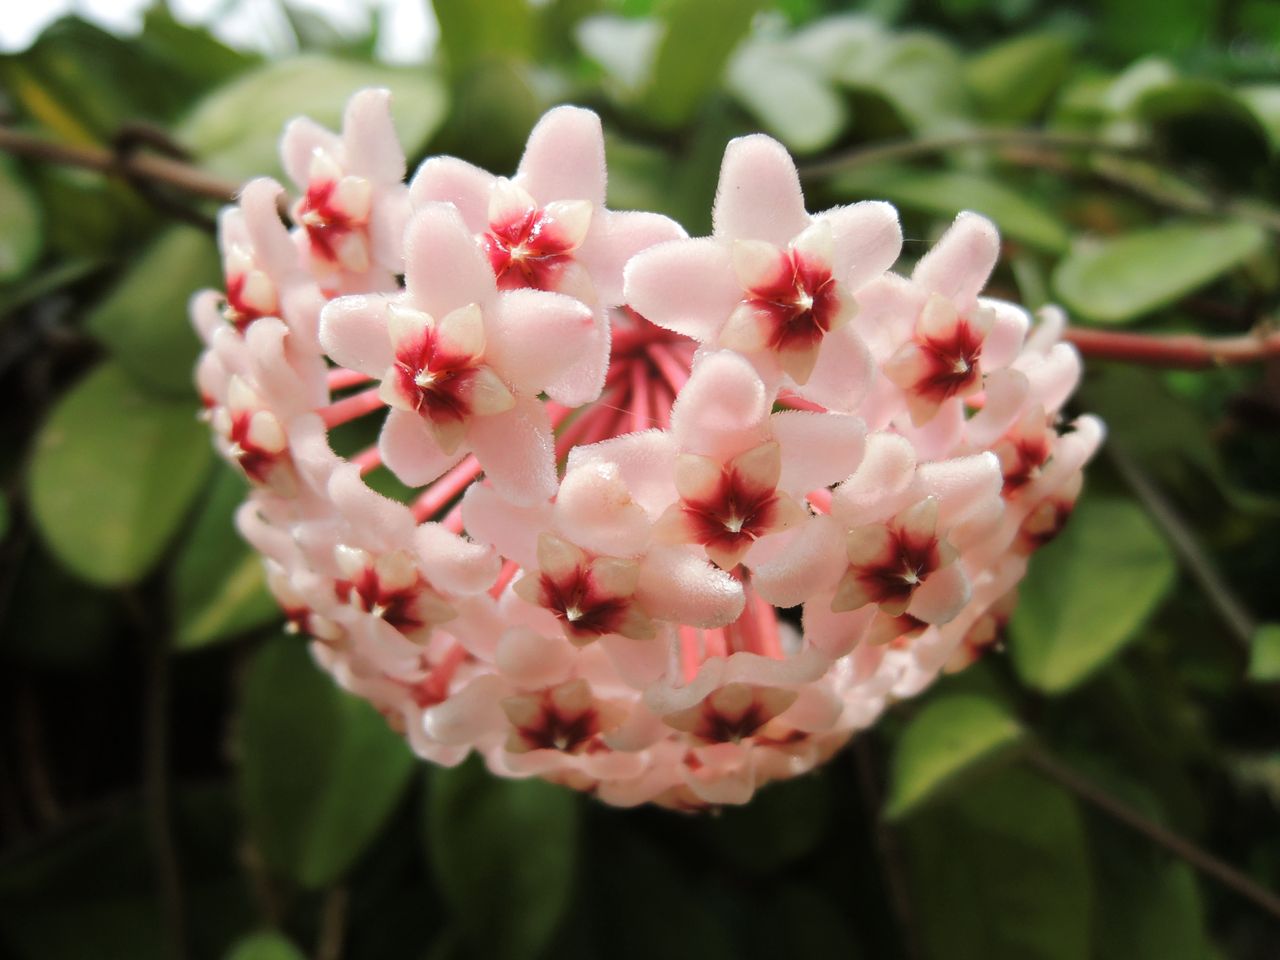 Superstition and beauty: The hoya's curious place in your home